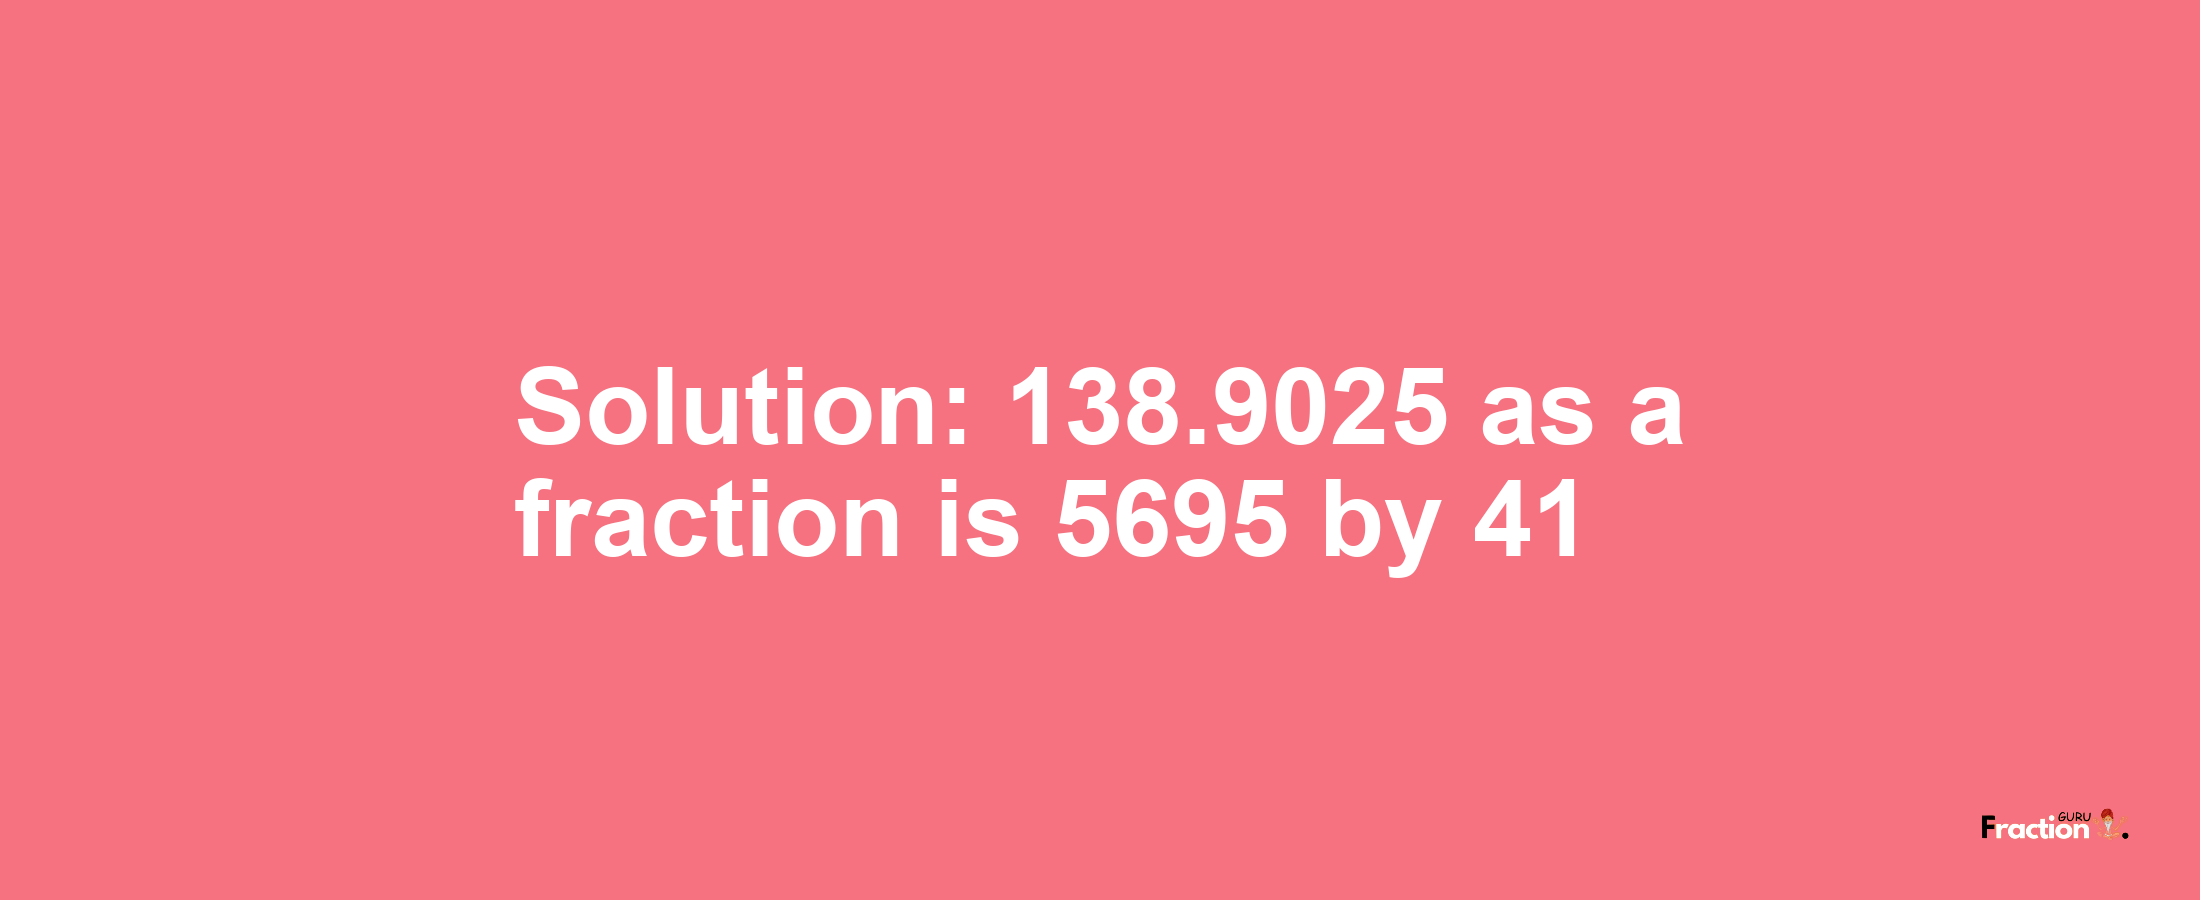 Solution:138.9025 as a fraction is 5695/41